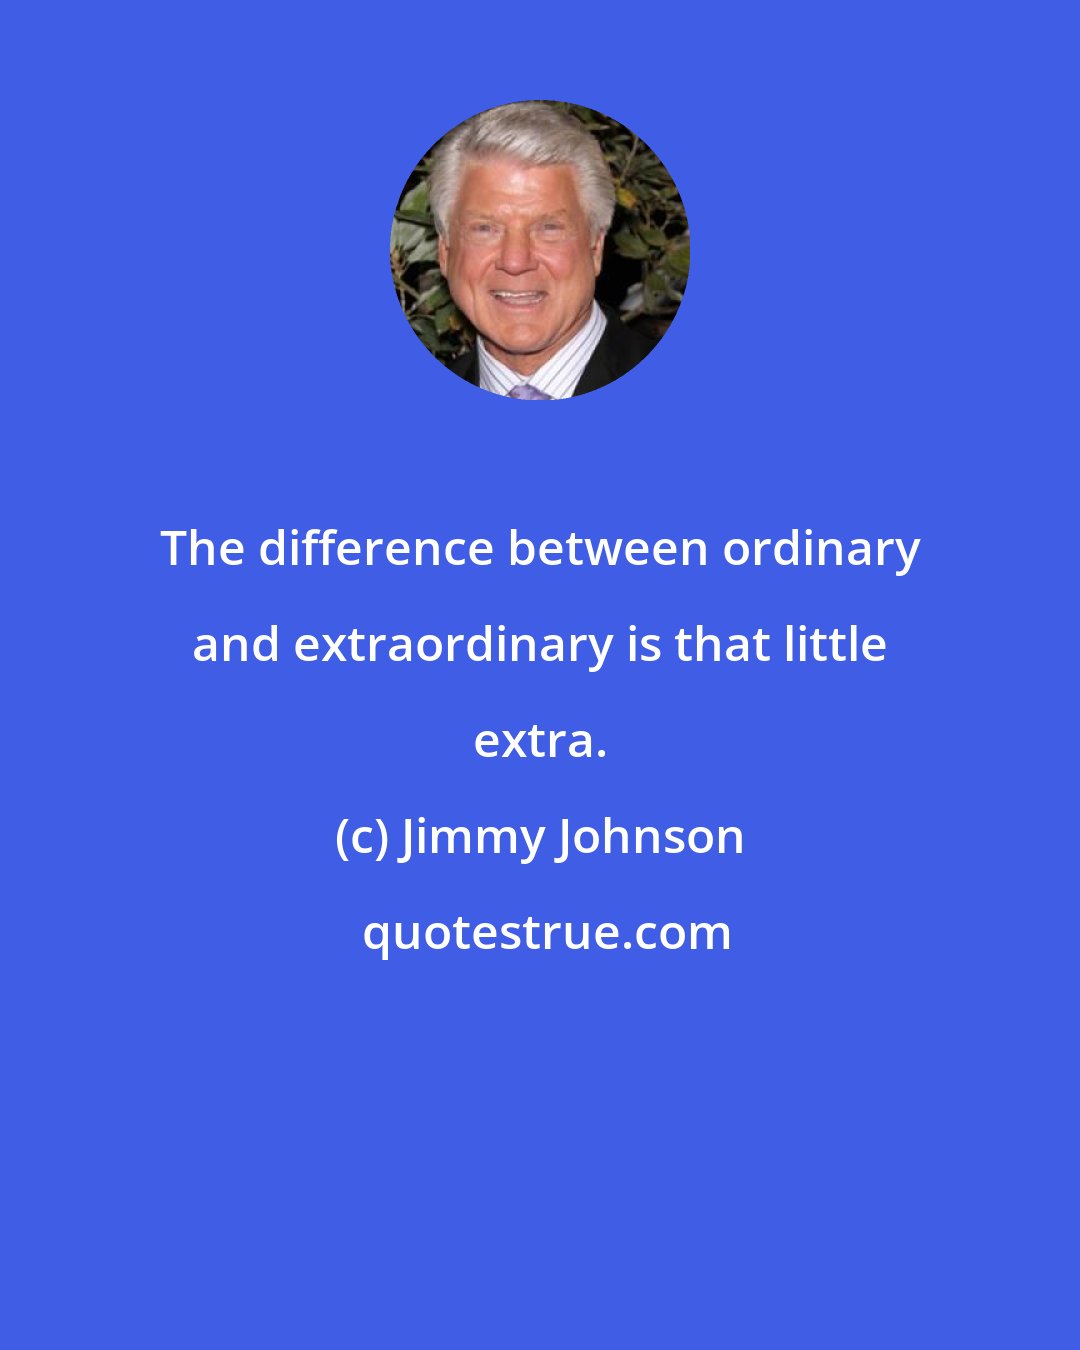 Jimmy Johnson: The difference between ordinary and extraordinary is that little extra.